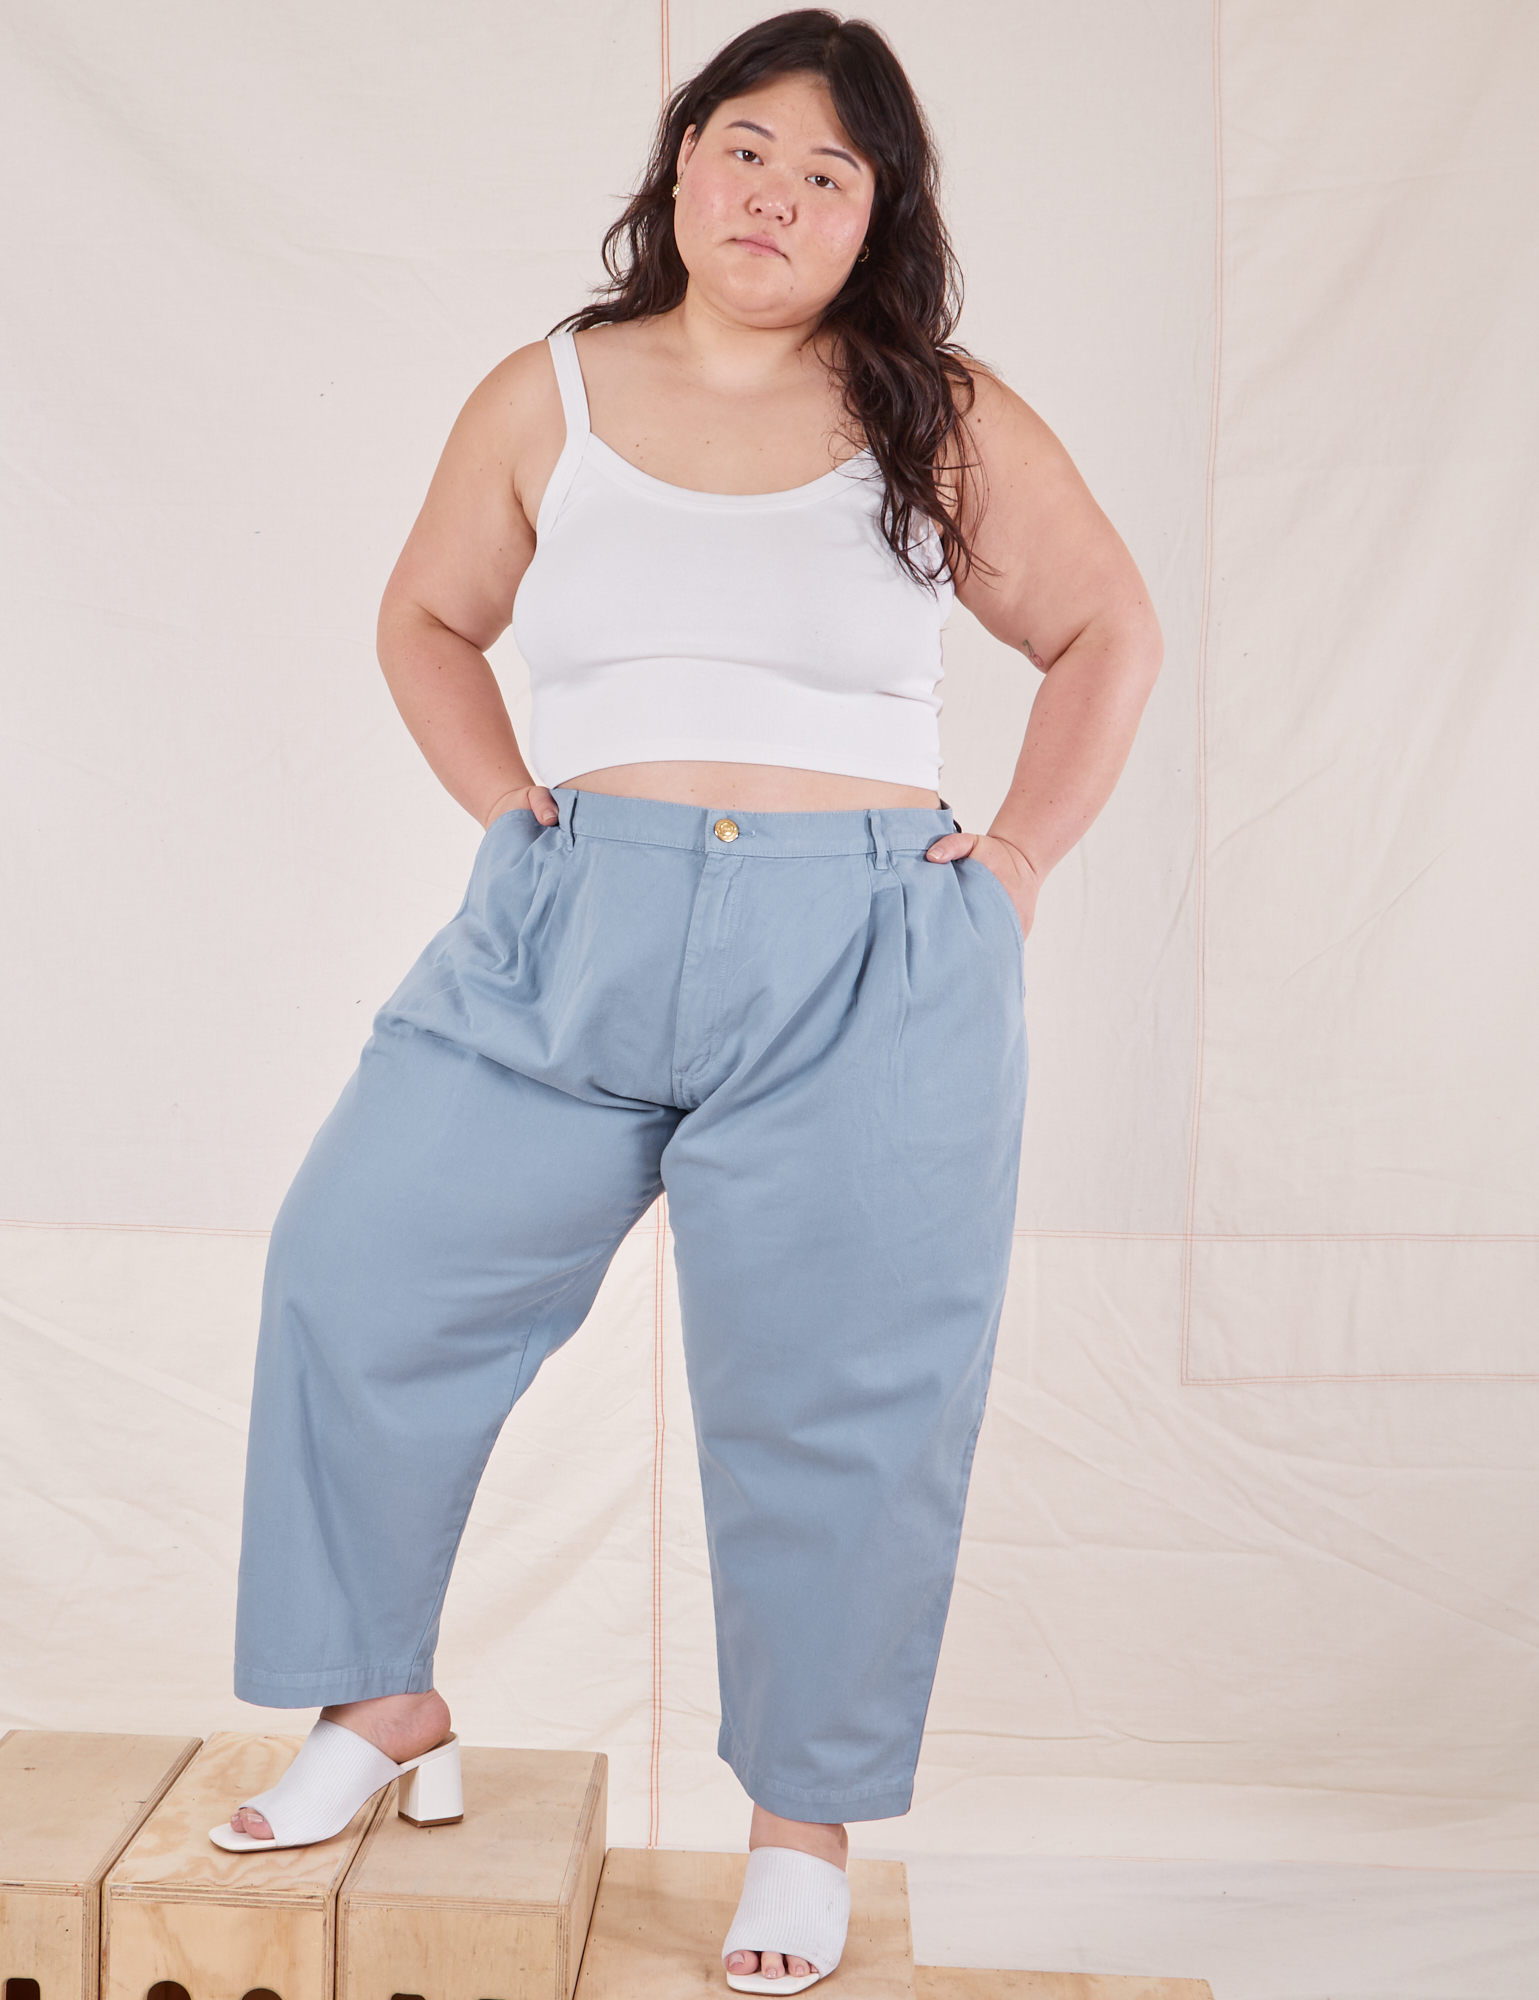 Ashley is 5&#39;7&quot; and wearing 1XL Petite Heavyweight Trousers in Periwinkle paired with vintage off-whit Cropped Cami